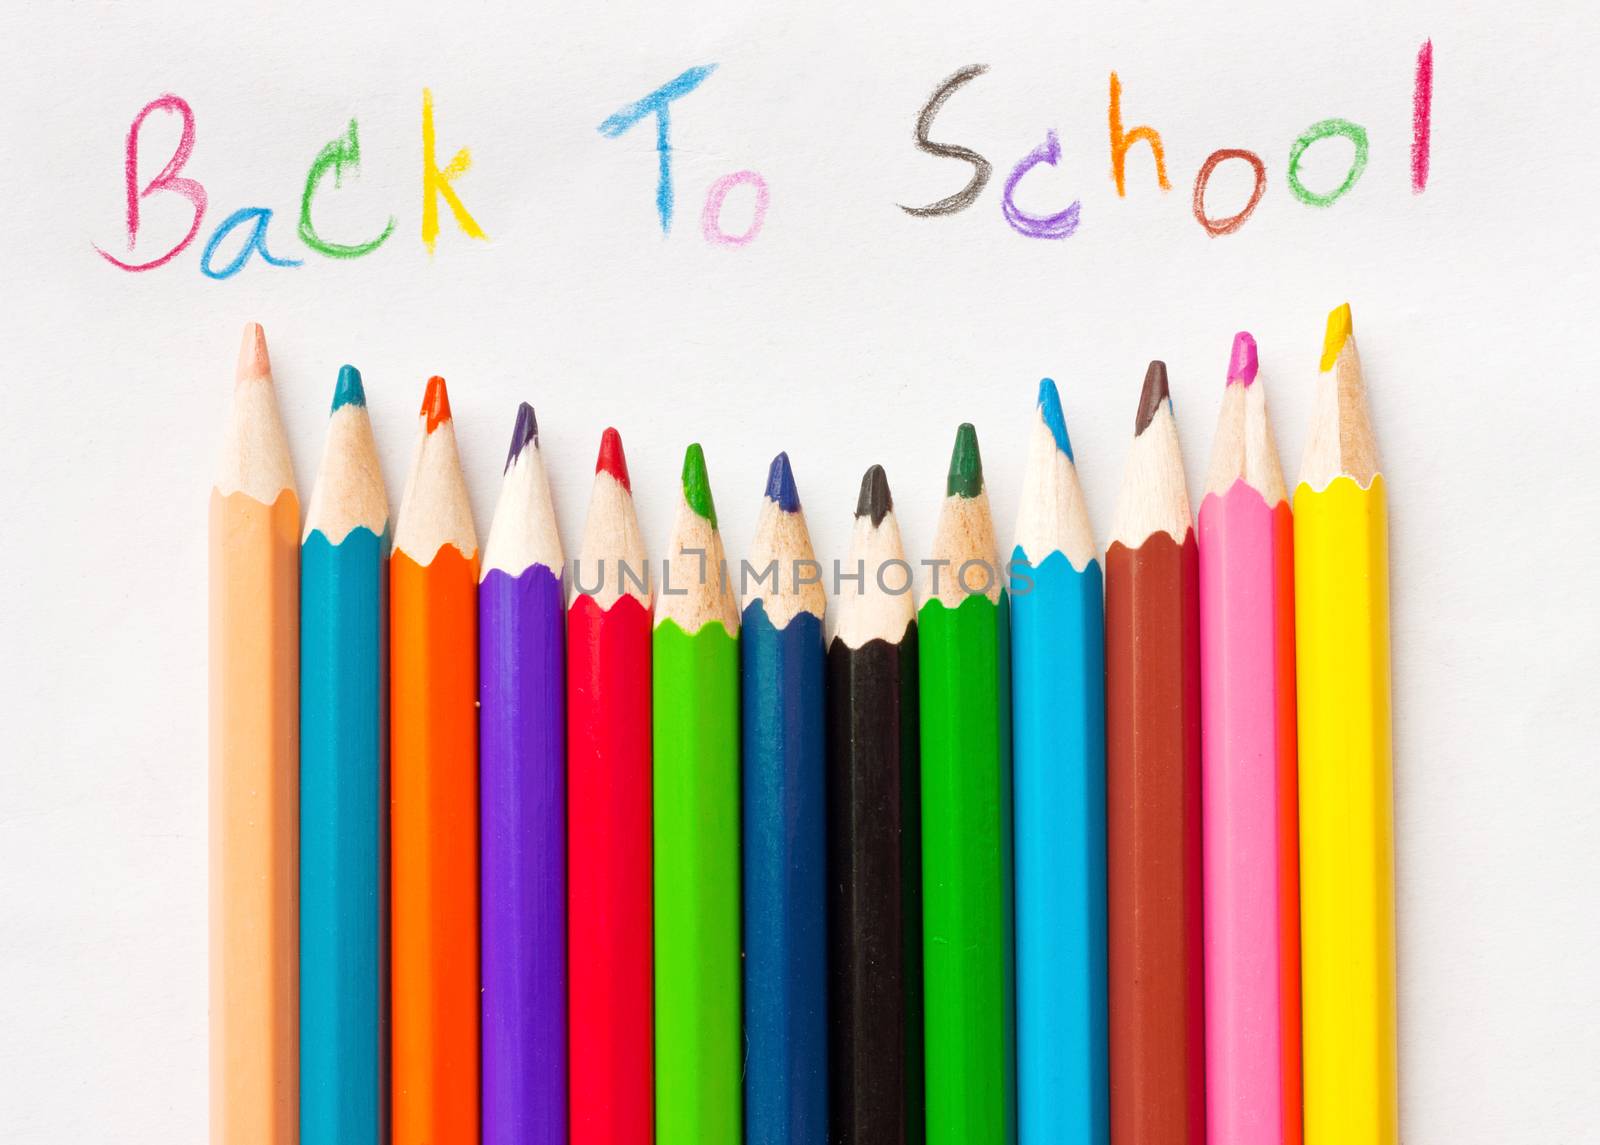 Back to school, Colorful pencil crayons on a white background